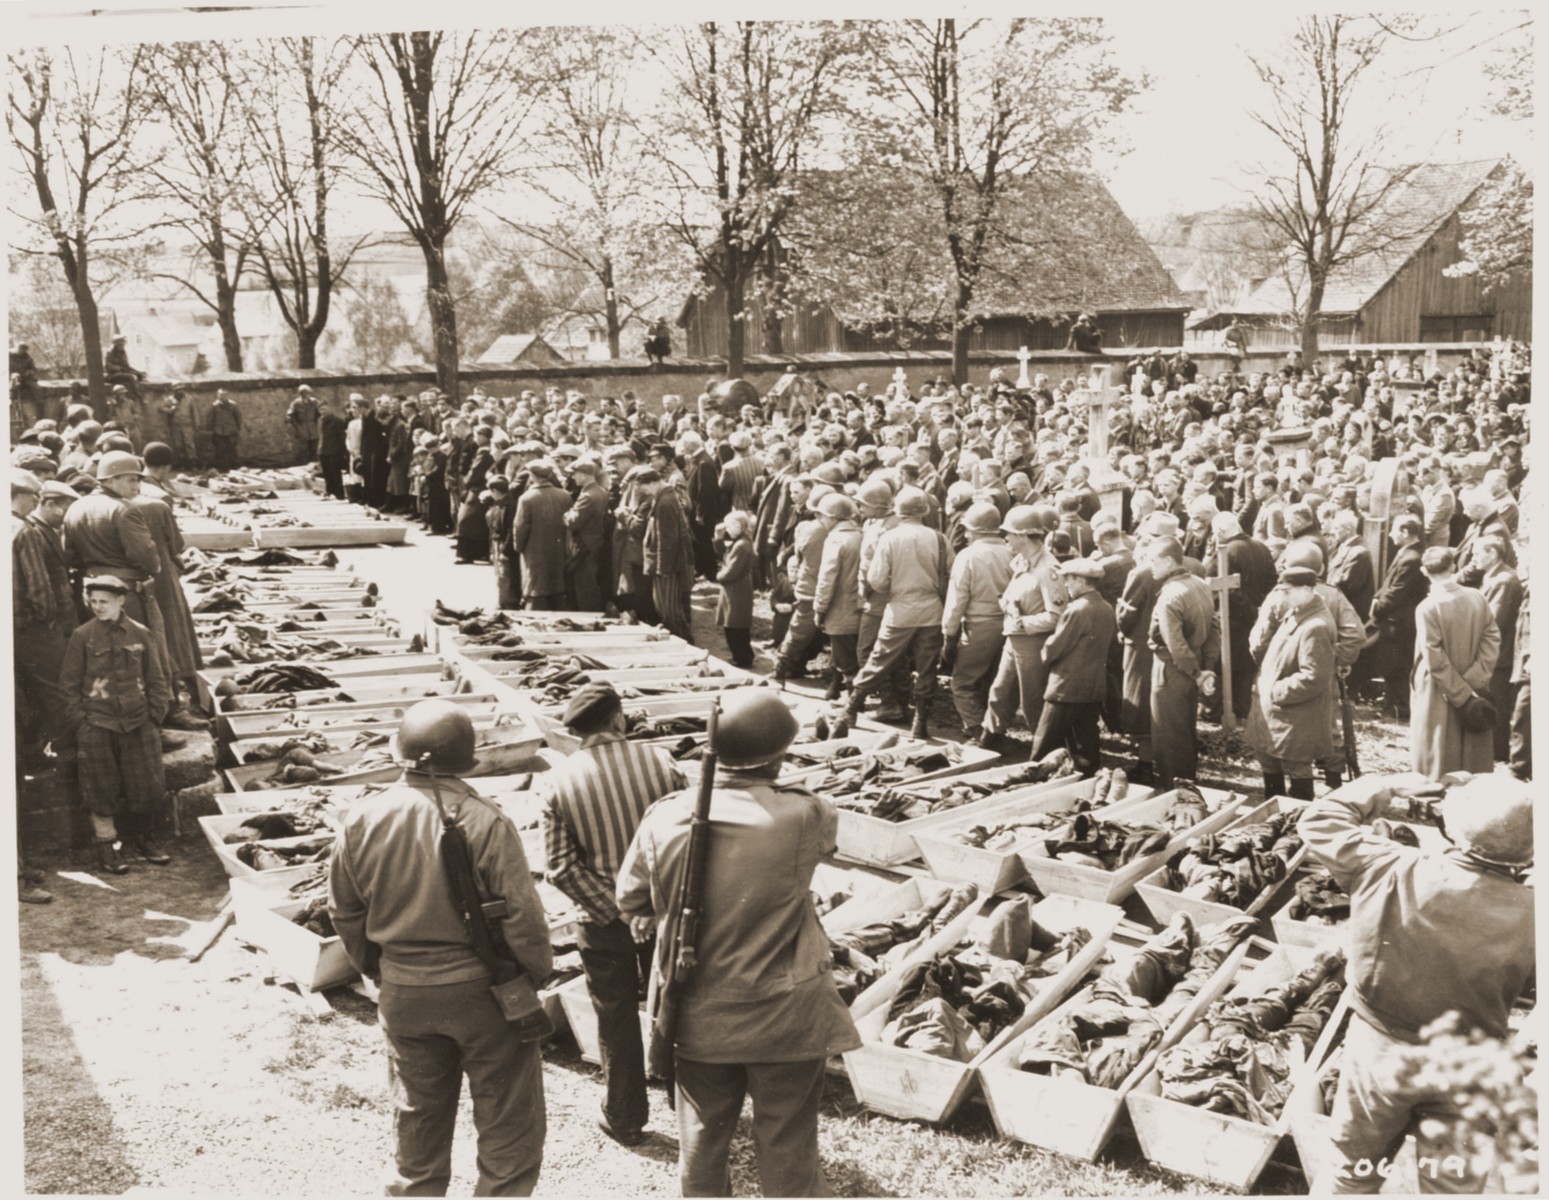 U.S. troops and German civilians from Neunburg vorm Wald attend a funeral service for Polish, Hungarian, and Russian Jews found in the forest near their town.  The victims were shot by the SS while on a death march from Flossenbuerg.

The original caption reads, "At the burial grounds outside Nurnburg, Germany, a prayer was offered in English, Polish, and German for the slave laborers who had been murdered by the Nazis." [sic]